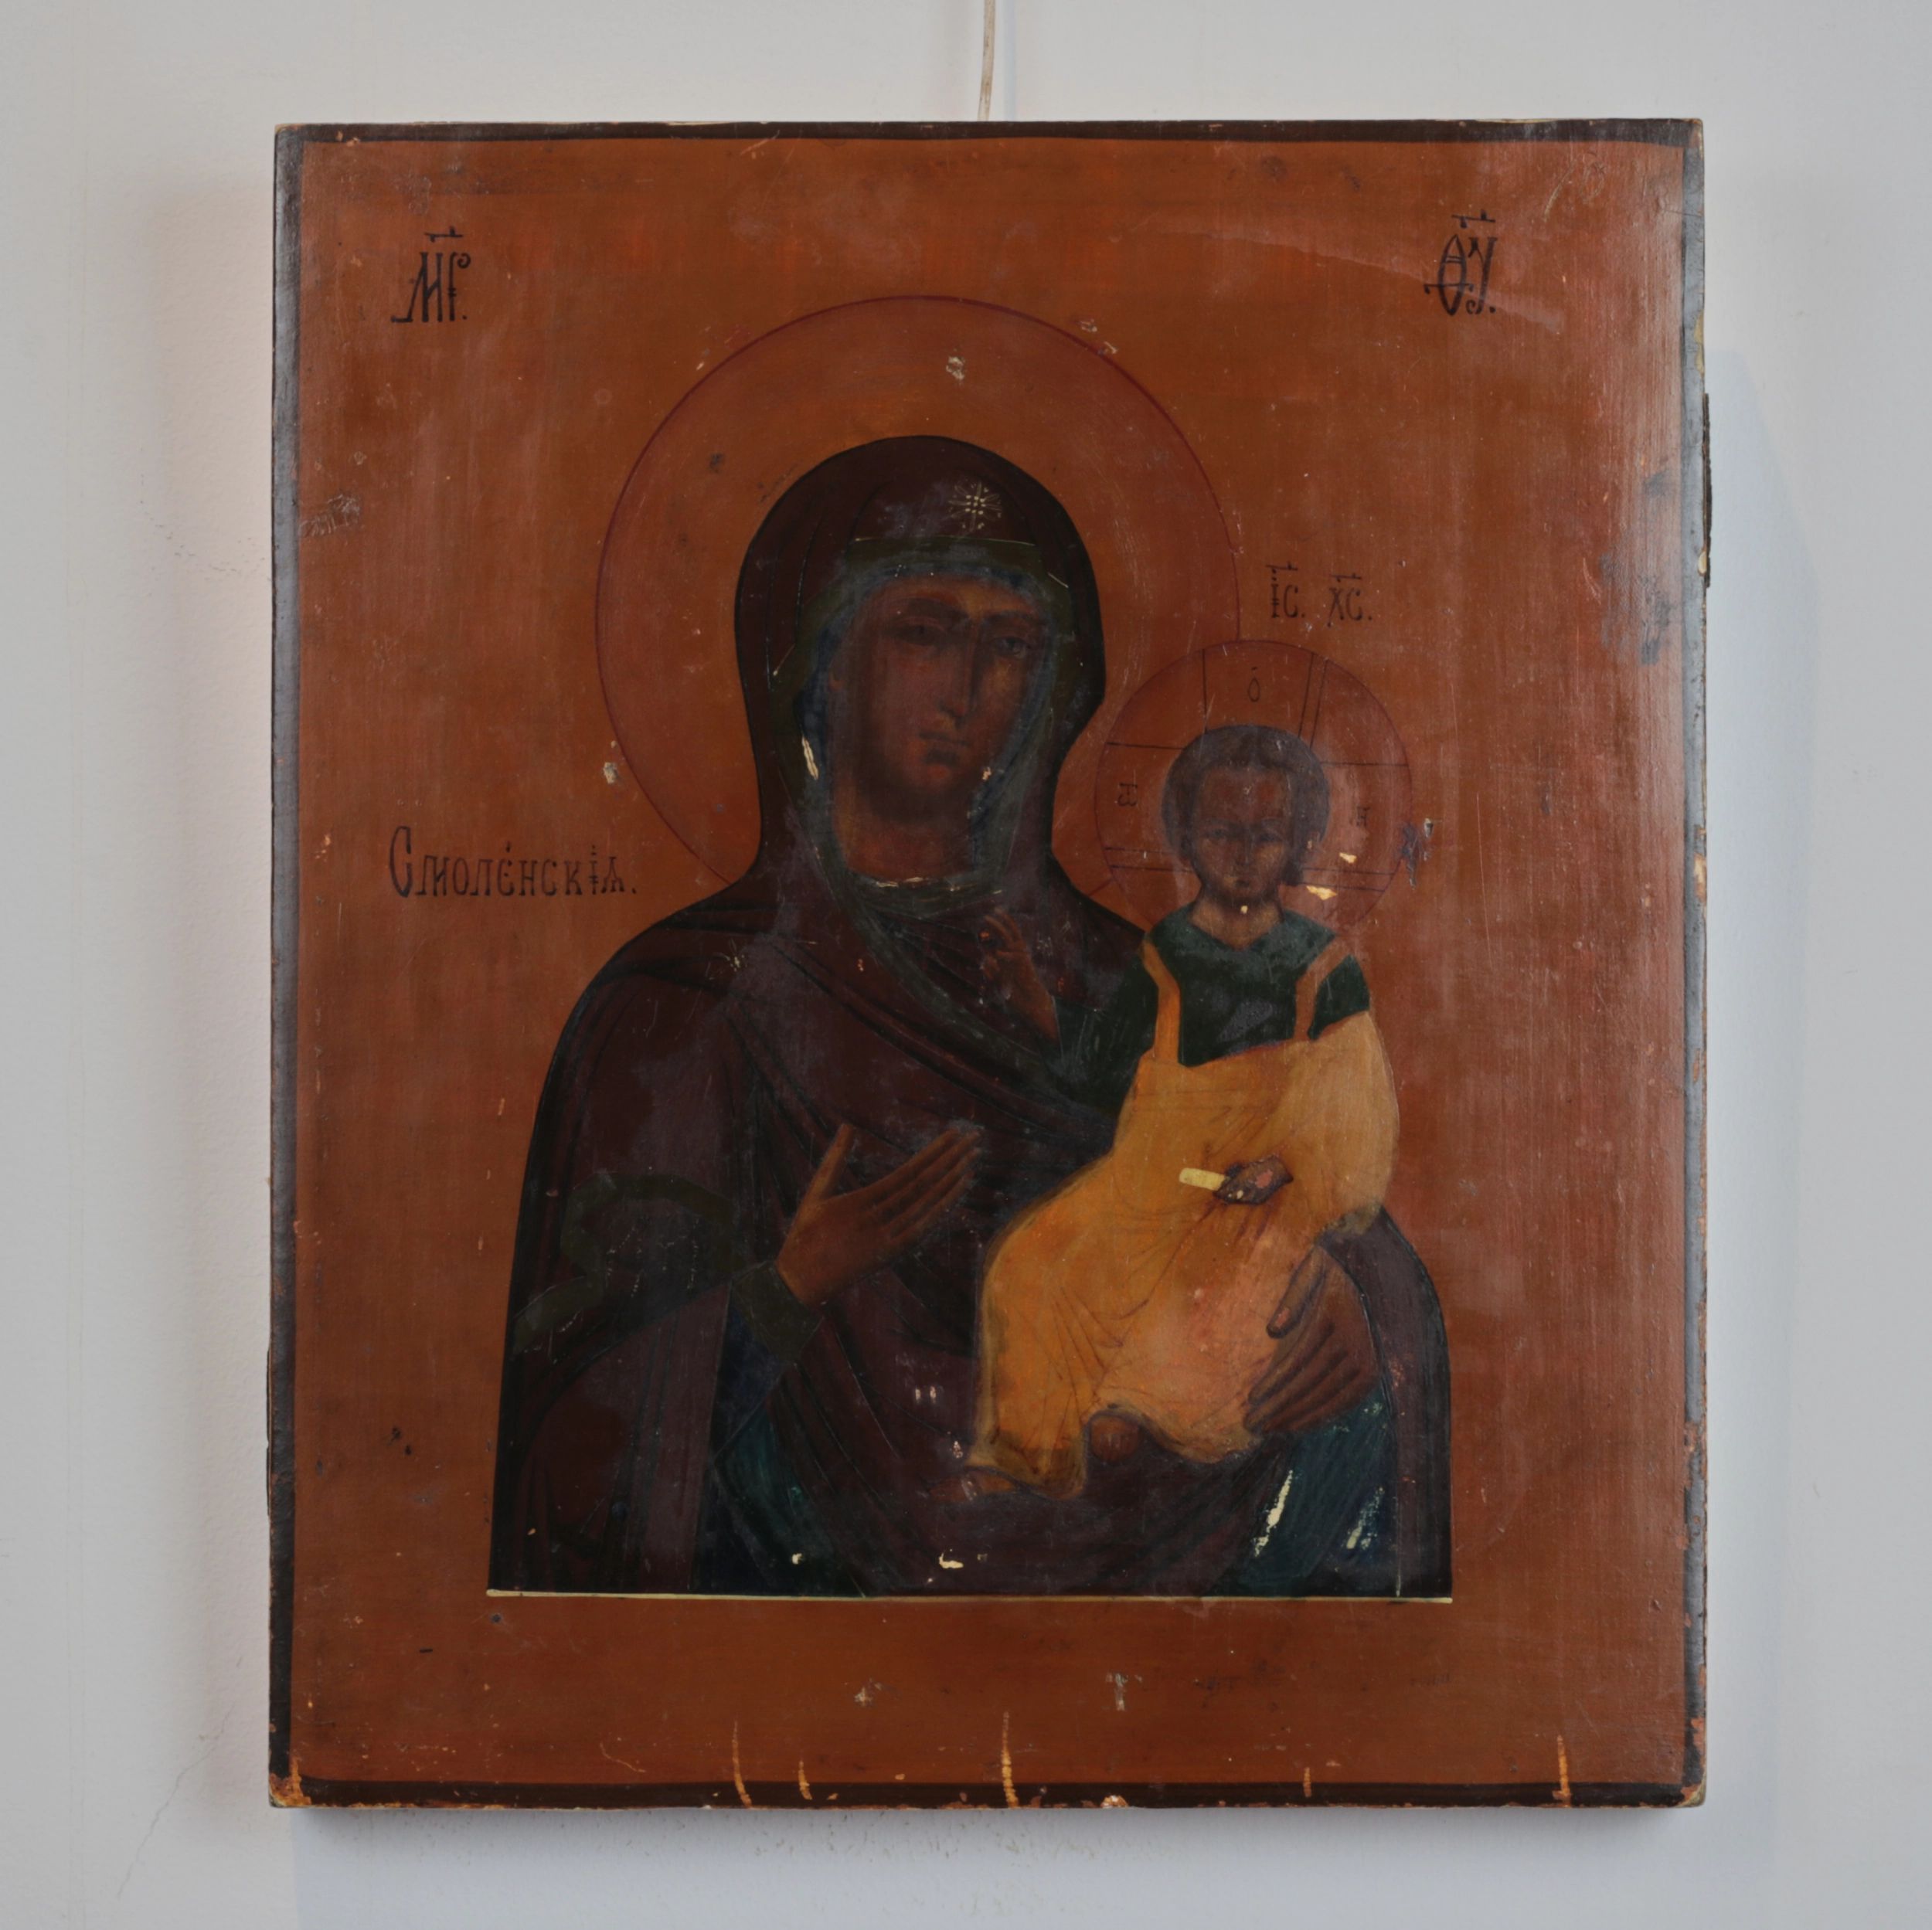 The-Smolensk-Icon-of-the-Most-Holy-Theotokos